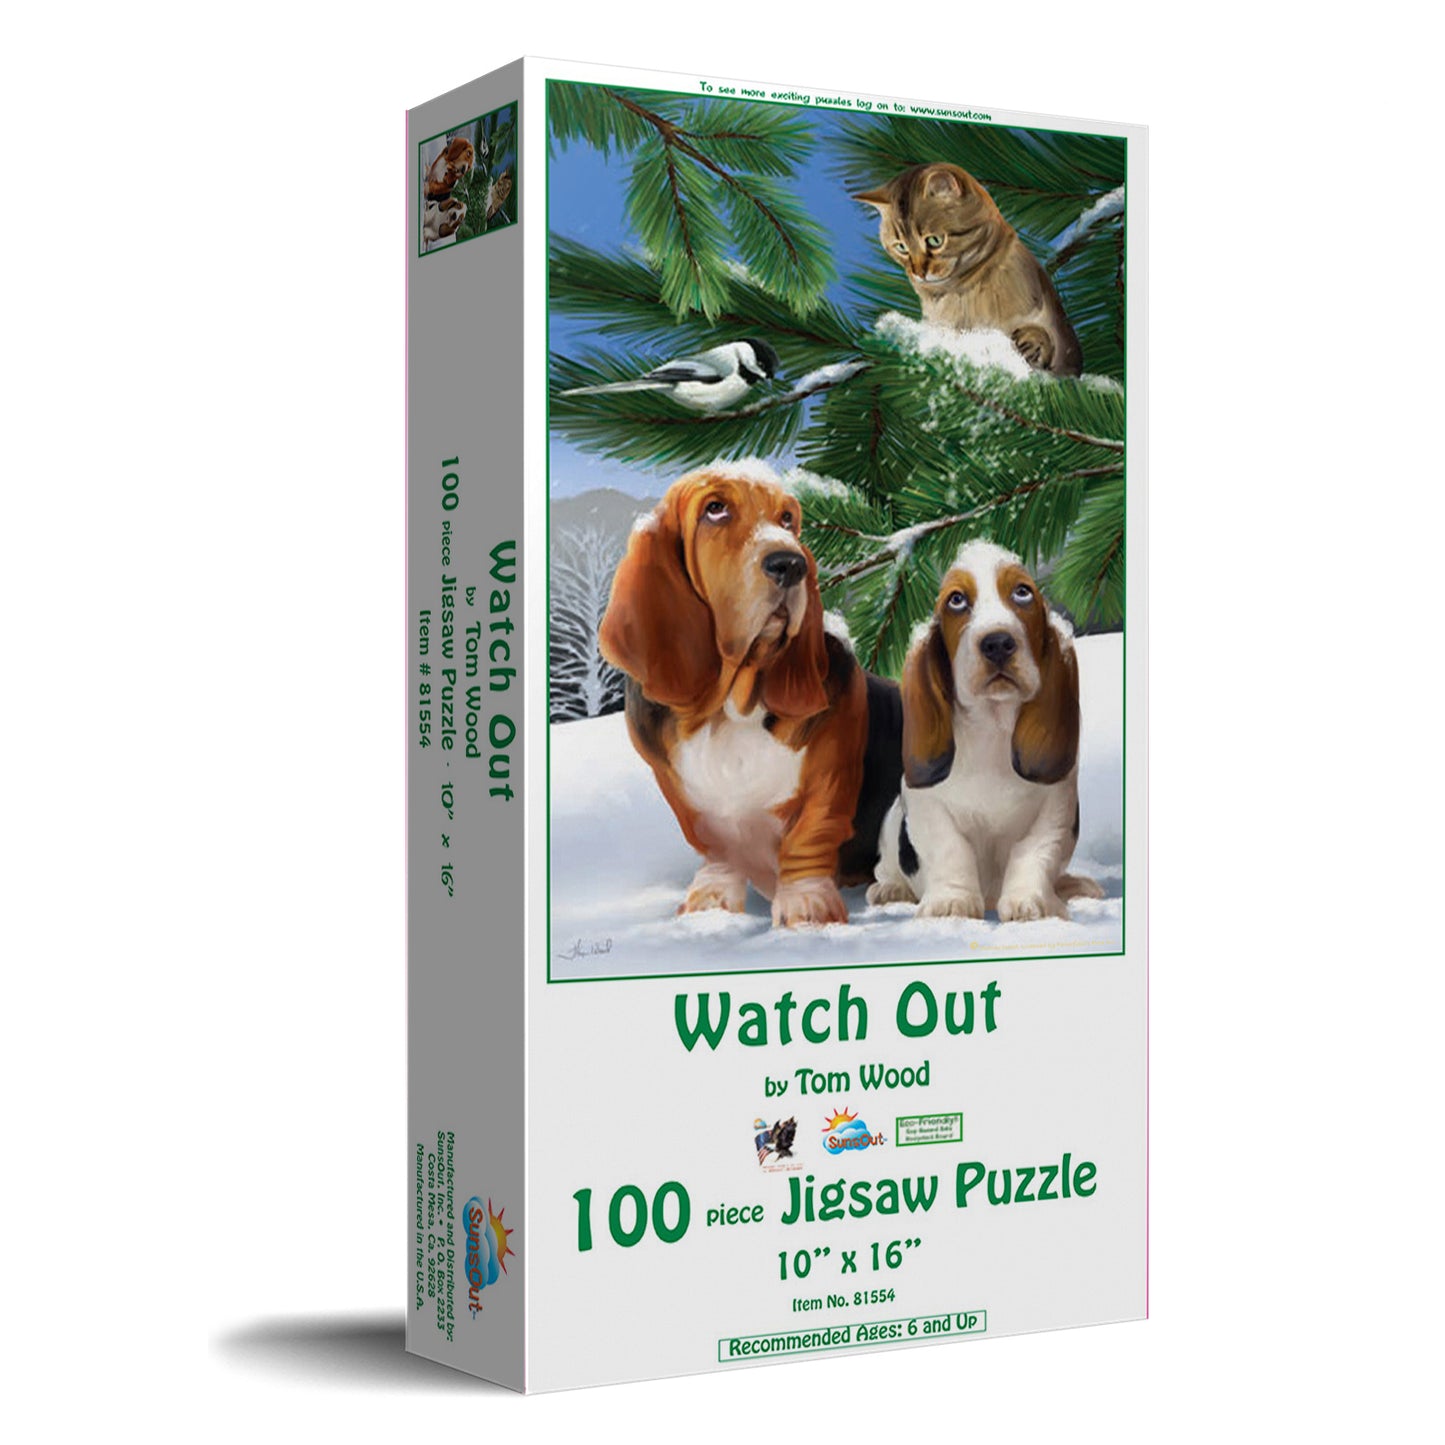 Watch Out - 100 Piece Jigsaw Puzzle